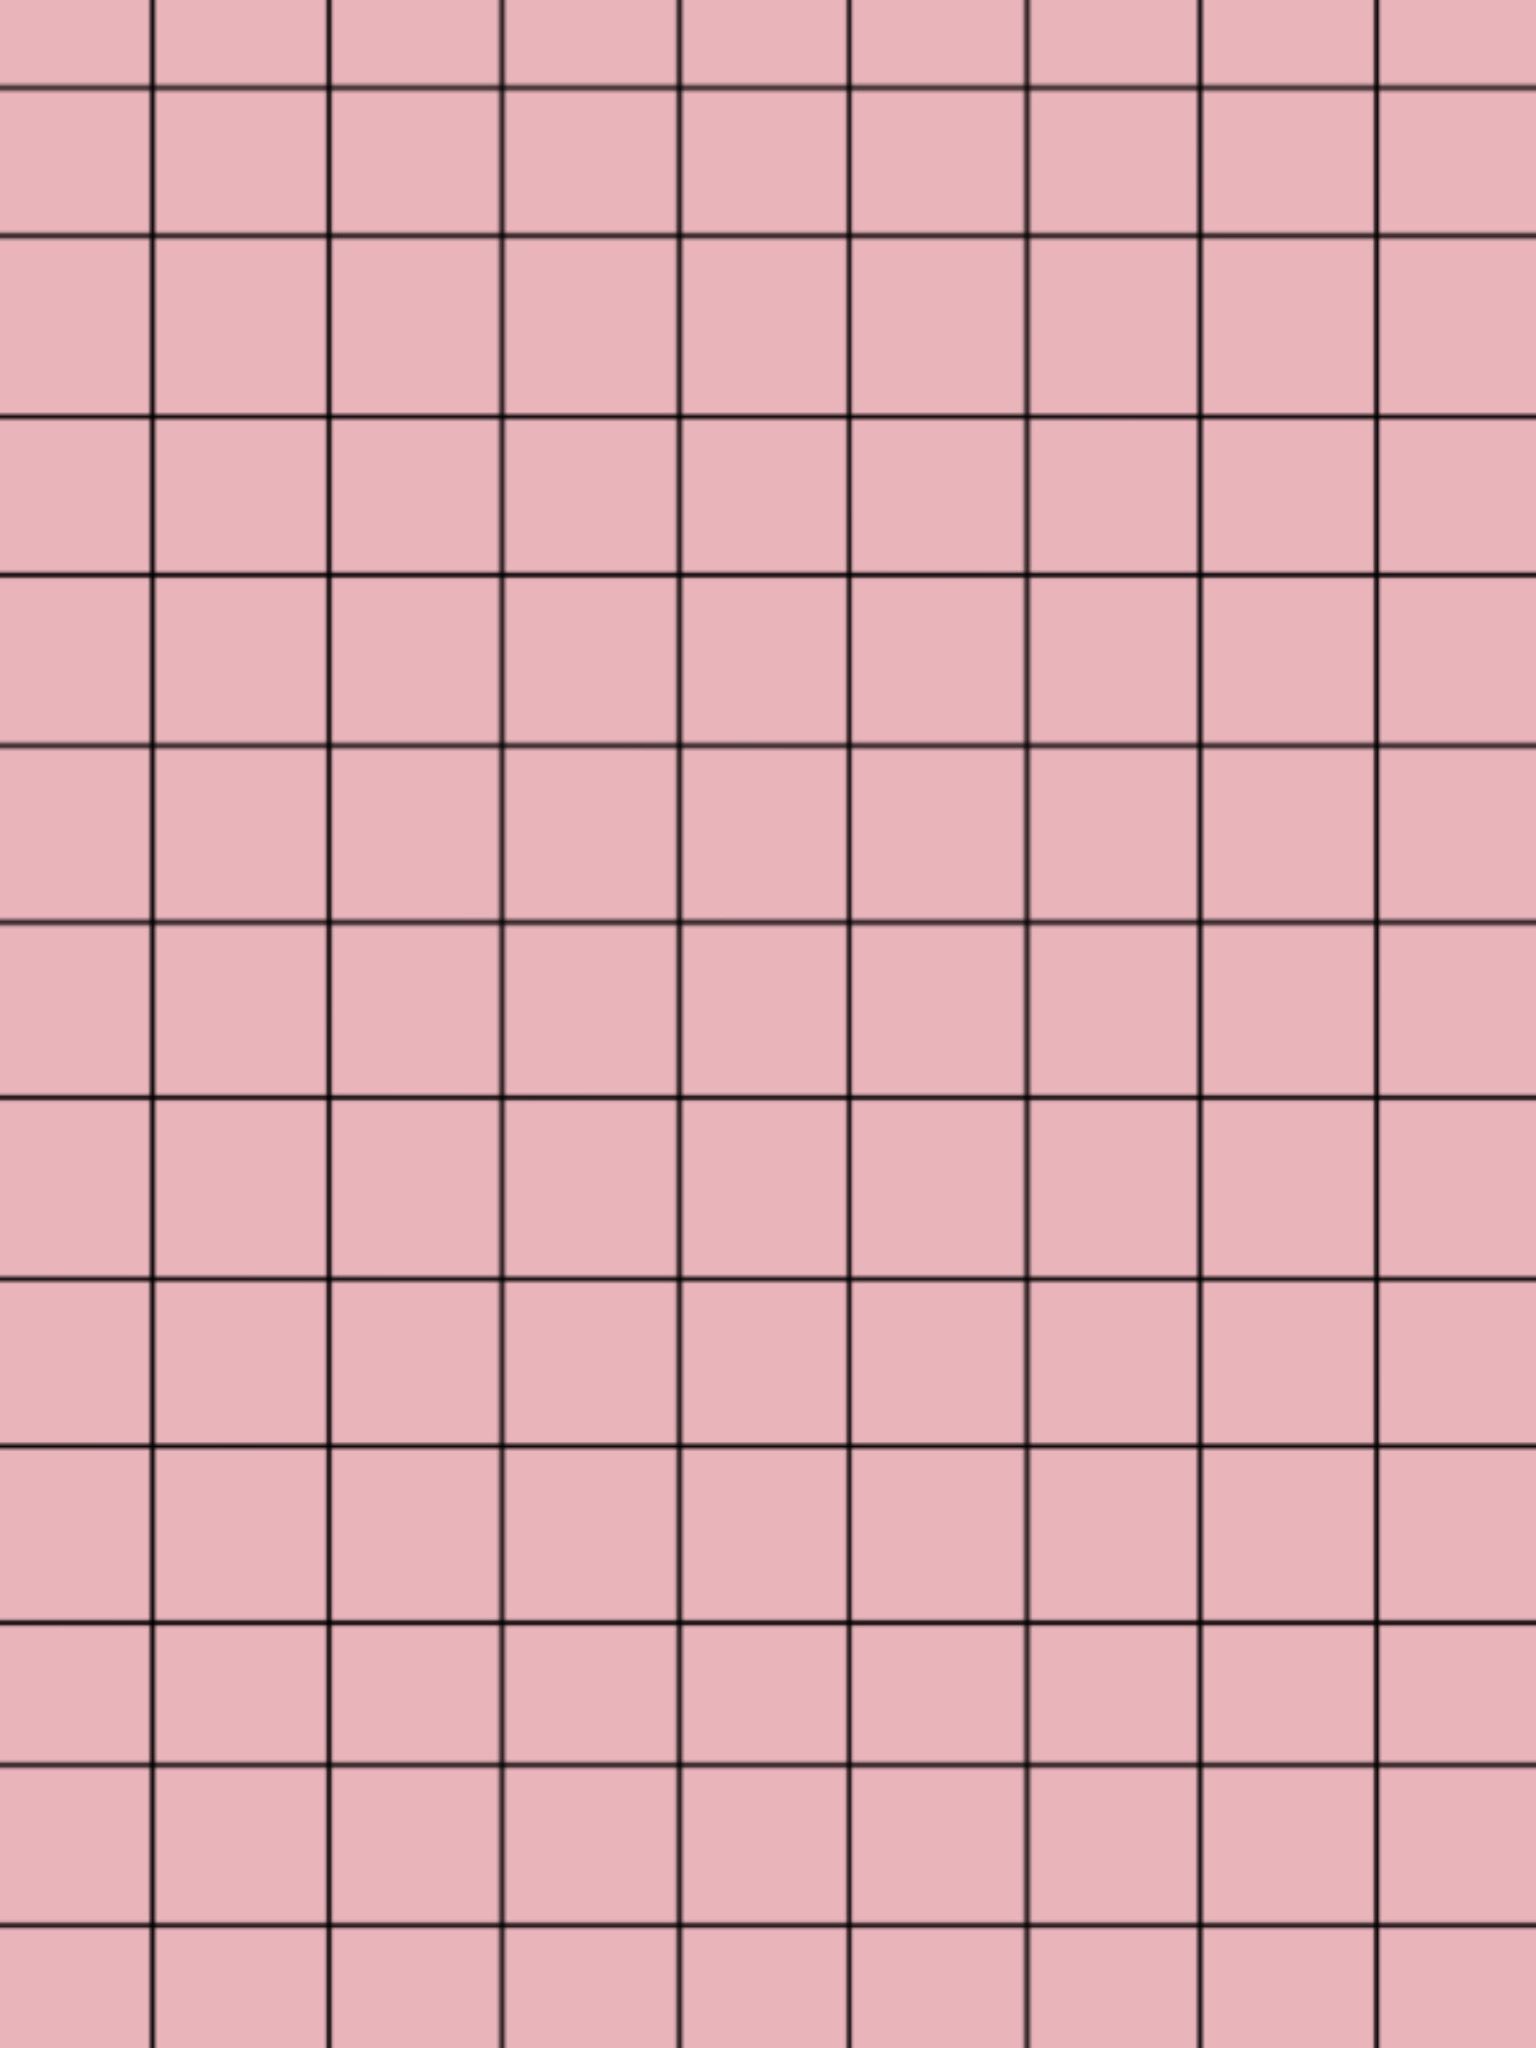 A pink grid with black squares - Grid